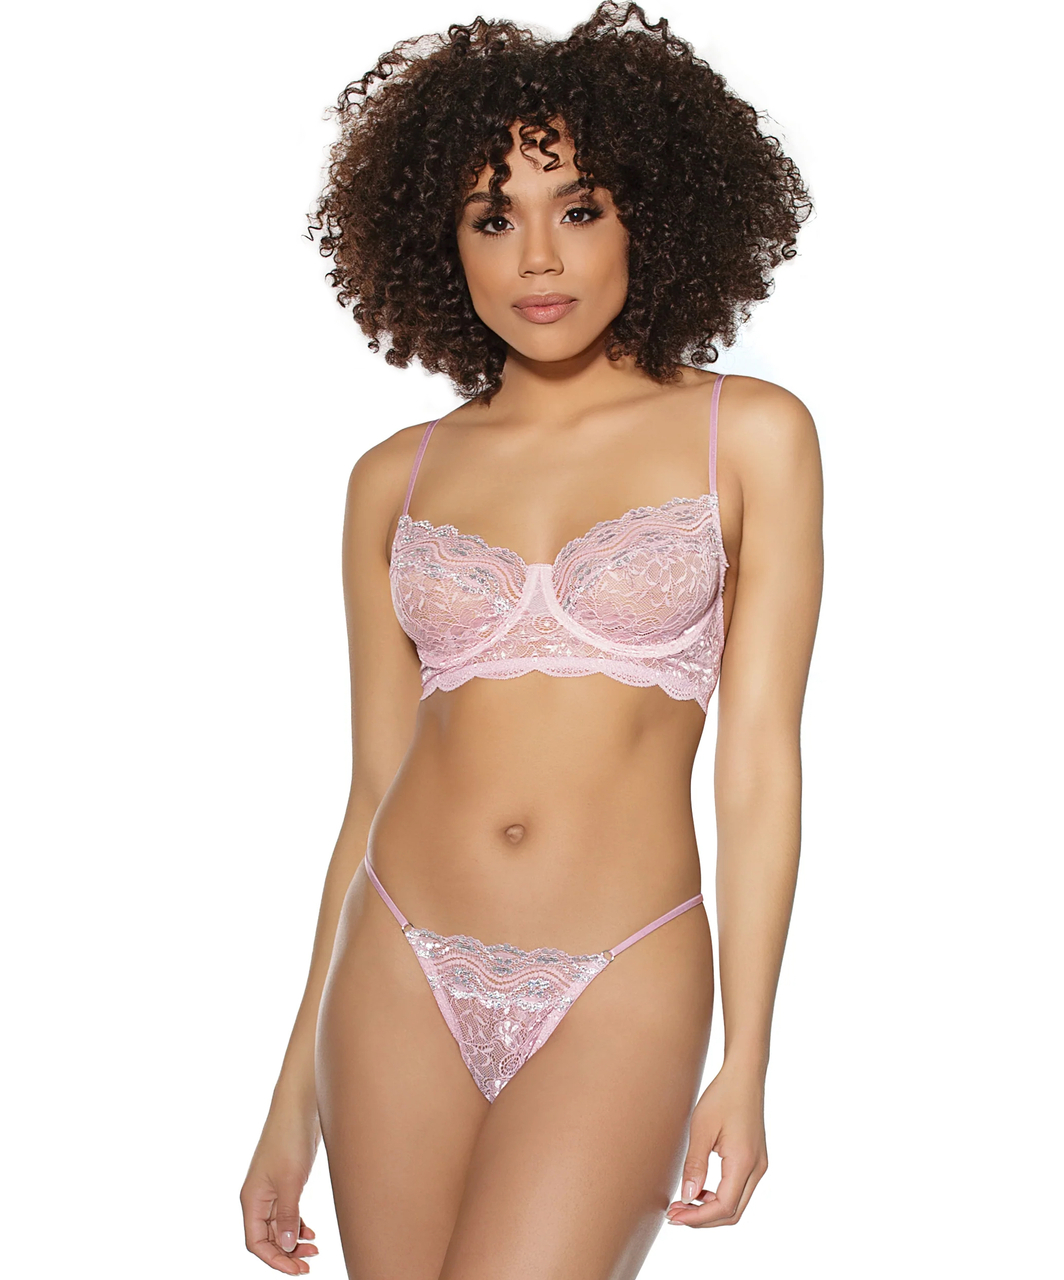 Coquette Lingerie pink lace lingerie set with shimmer embroidery